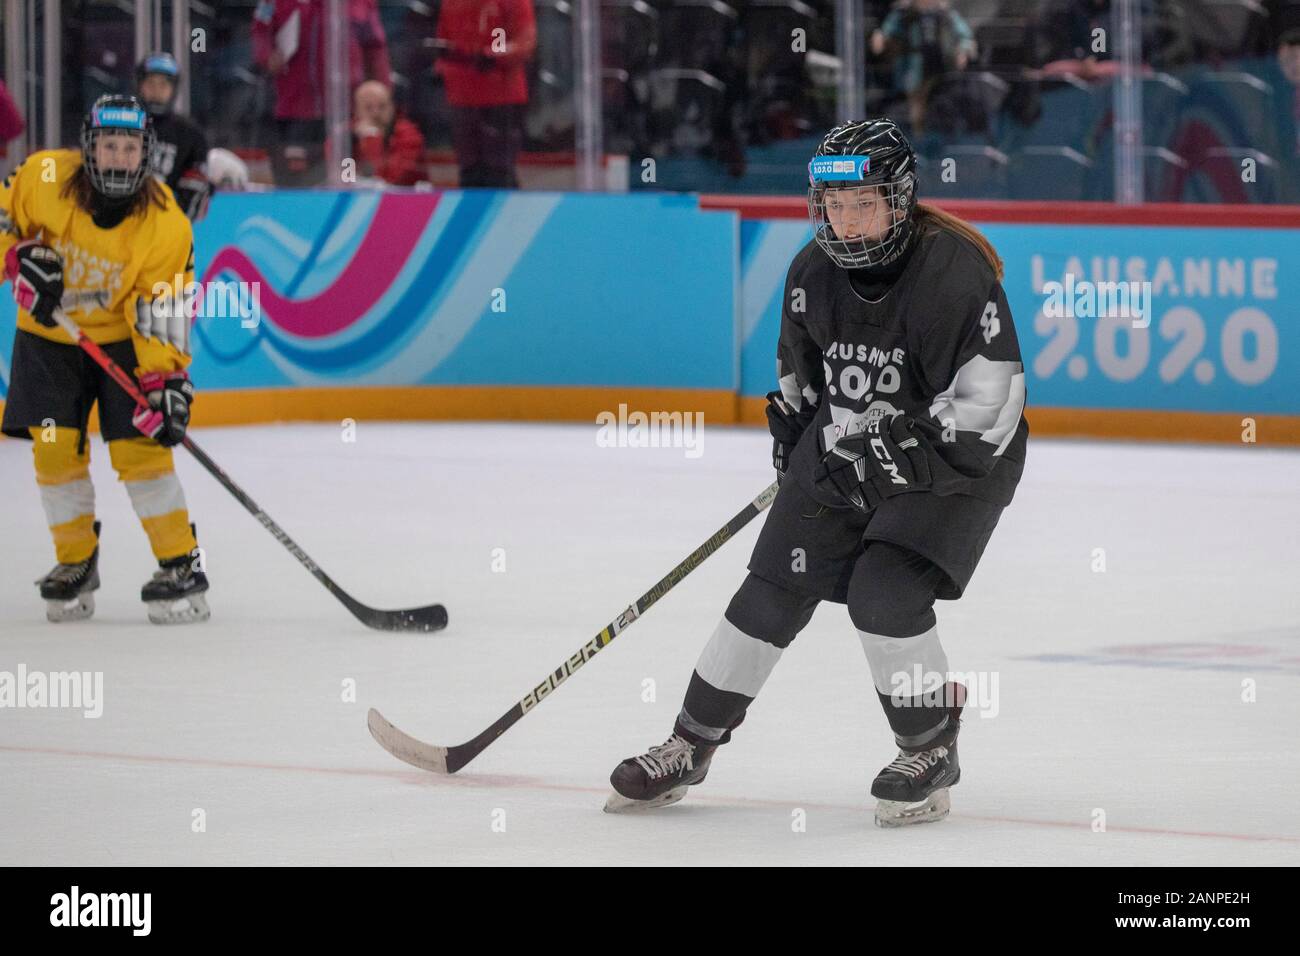 Team GB's Amy Robery (15) during the women's 3 on 3 Ice Hockey final at the Lausanne 2020 Youth Olympic Games on the 15h January 2020 Stock Photo